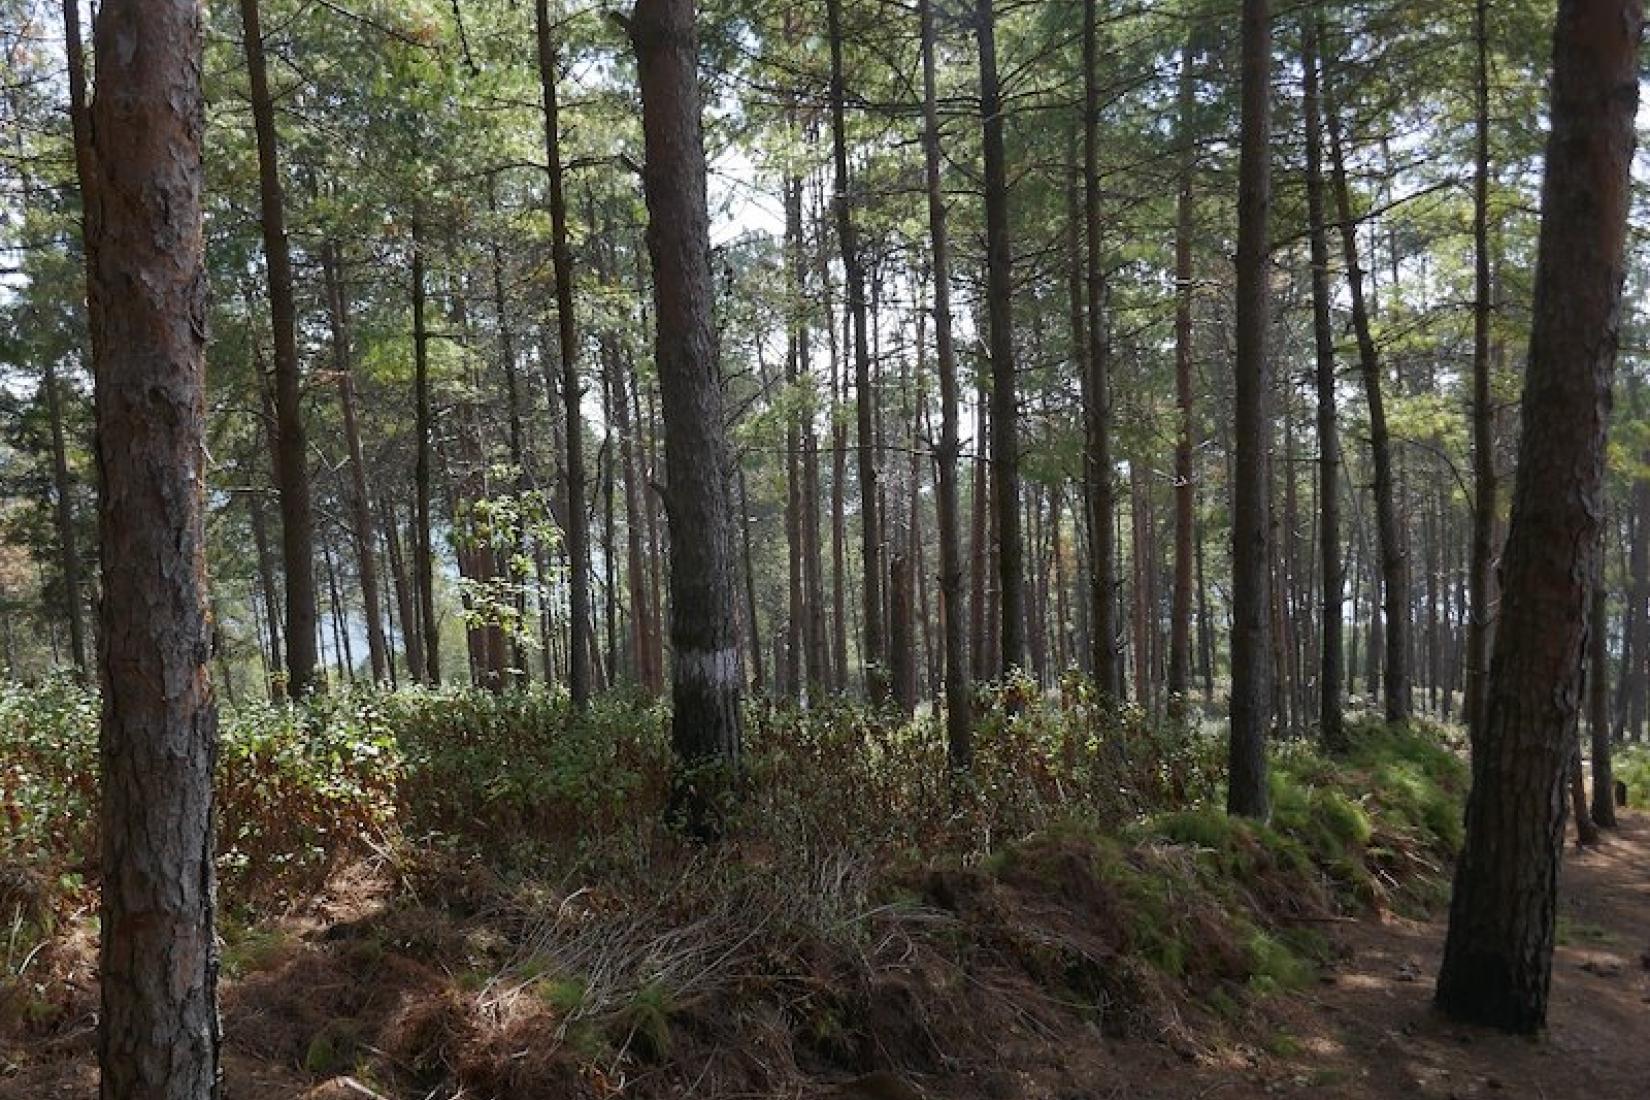 A key focus for the EnLiFT2 project is to help the Community Forest User Groups to make the transition from planting, growing and protecting their forests, to thinning, harvesting and utilisation. At left is a typical 35-40 year-old stand of Pinus roxburghii (Himalayan Pine) that is now mature and no longer growing. It has been thinned in the past but the tree density is such that the canopy is too closed to allow natural regeneration to occur.